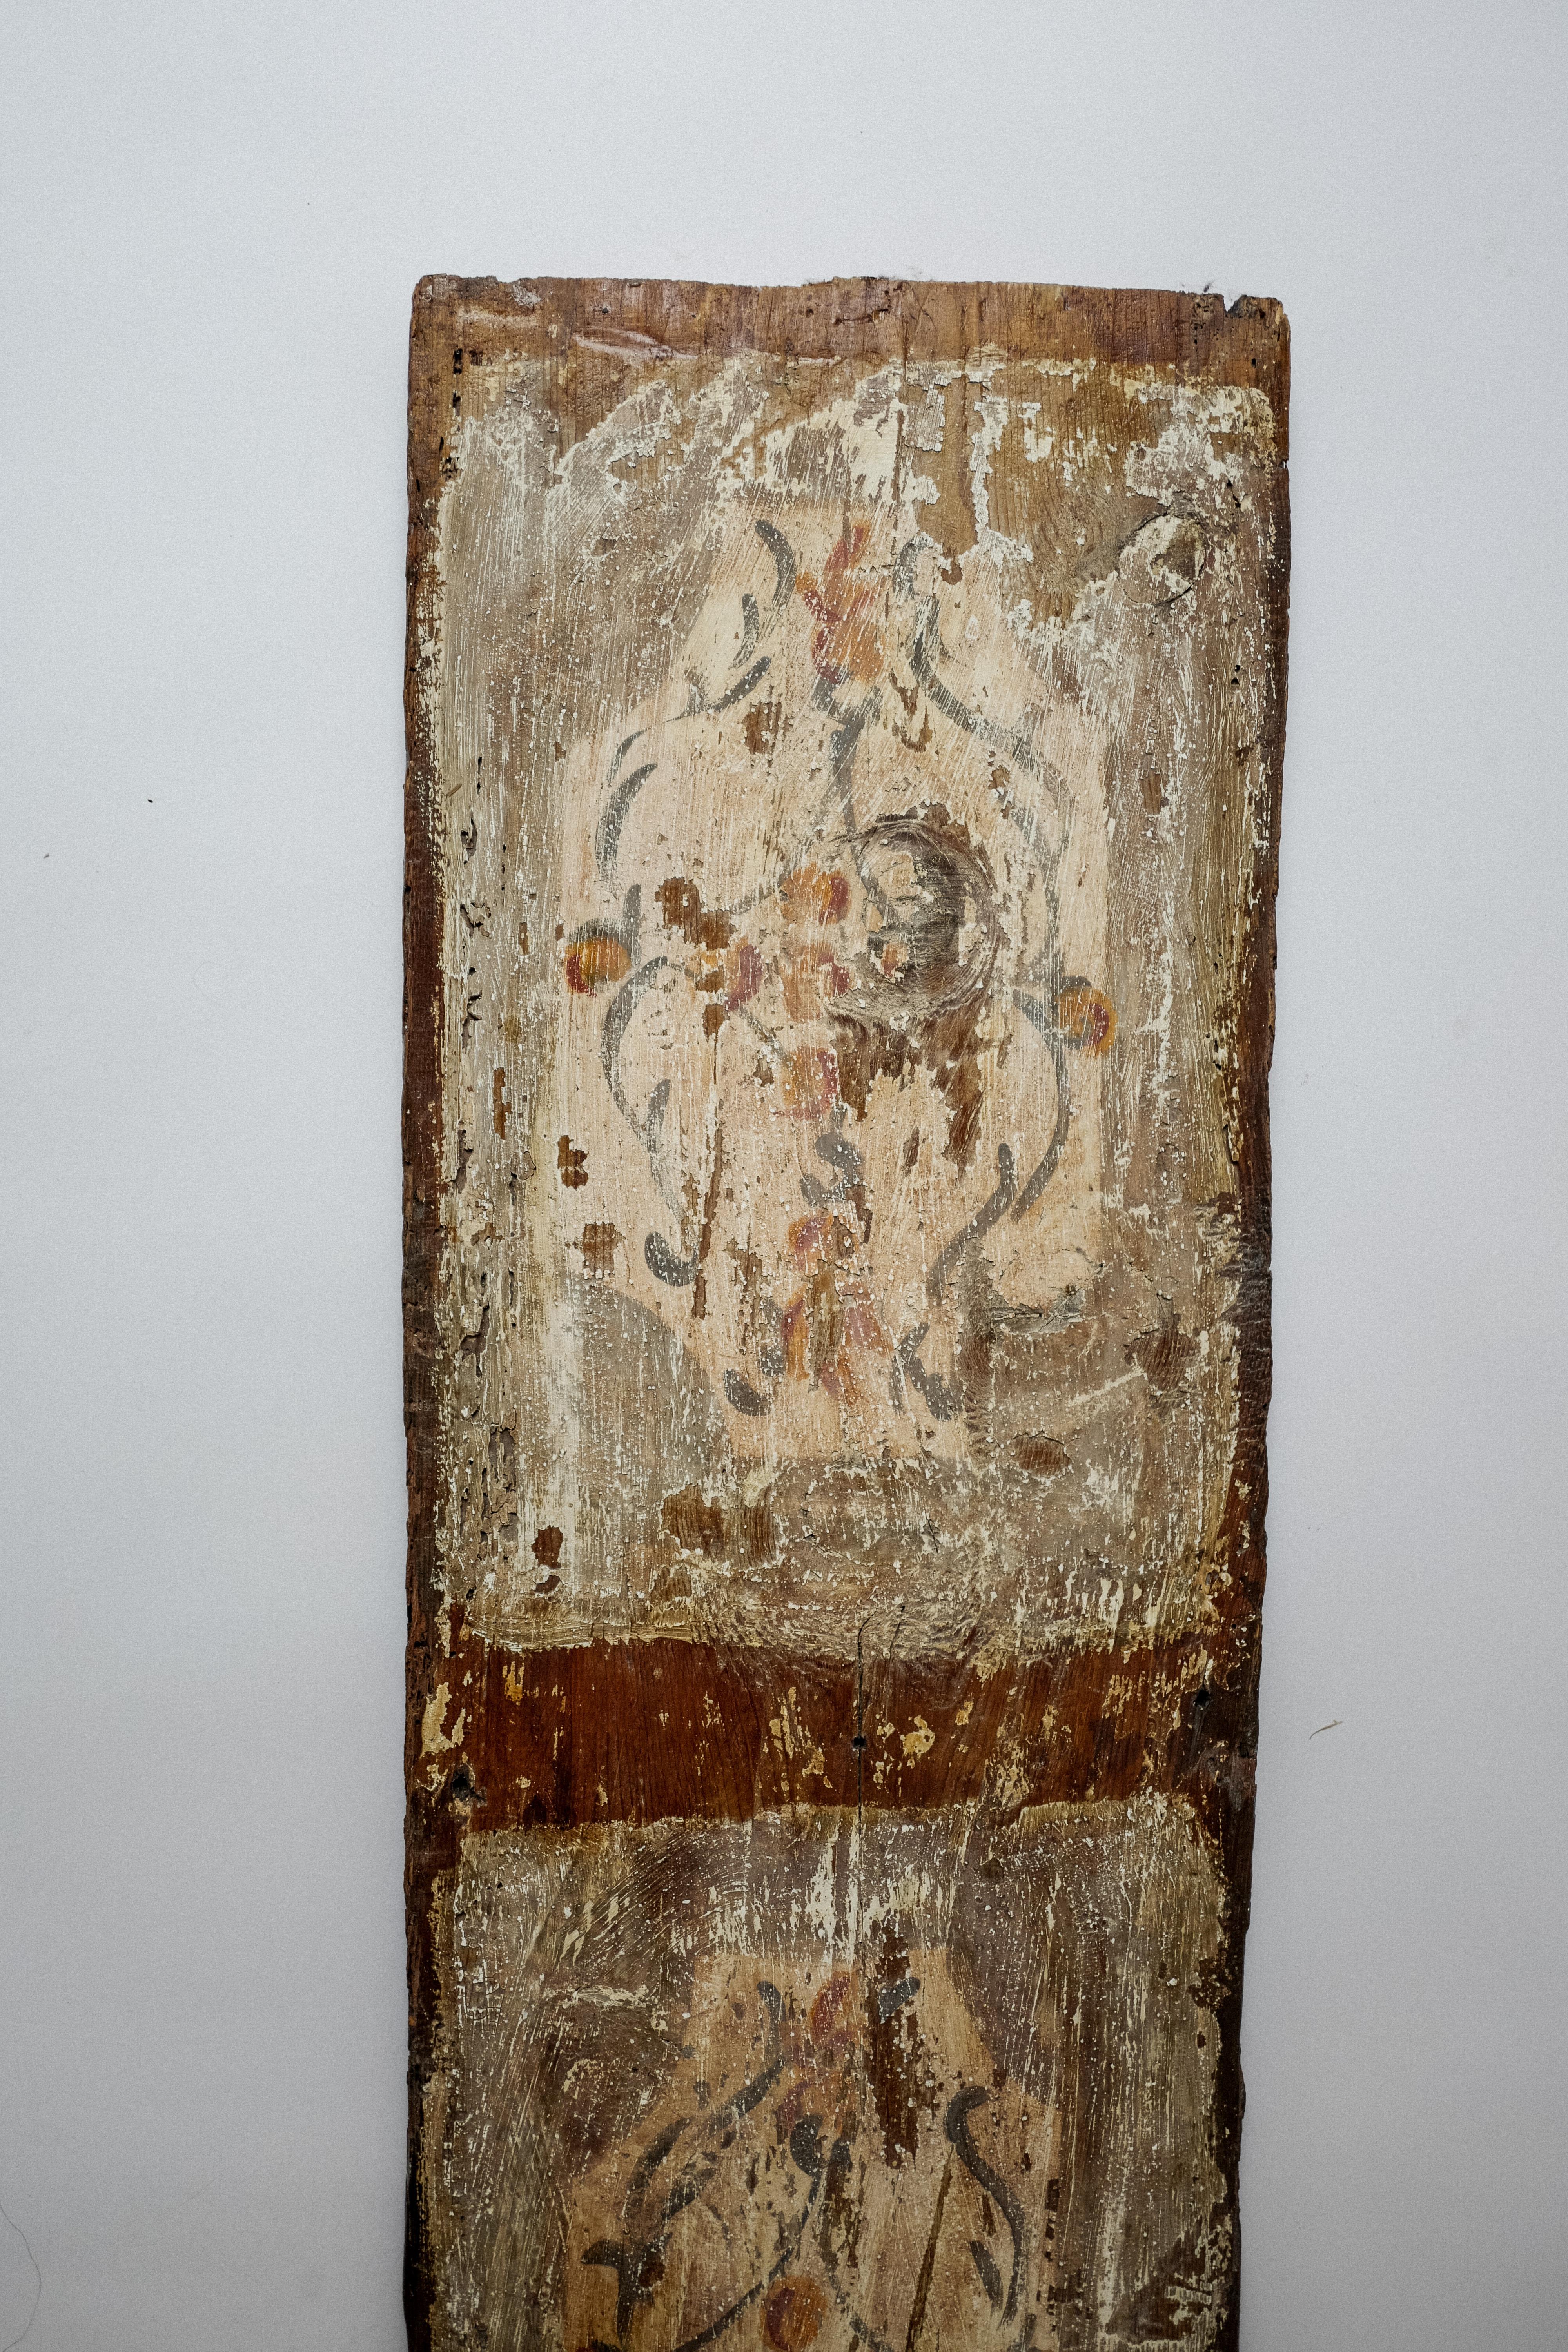 A wonderful unique set of 17th Century Italian painted wood ceiling panels. A set of 5 pieces at various sizes. Please see individual board measurements in inches below:

Board 1: 13